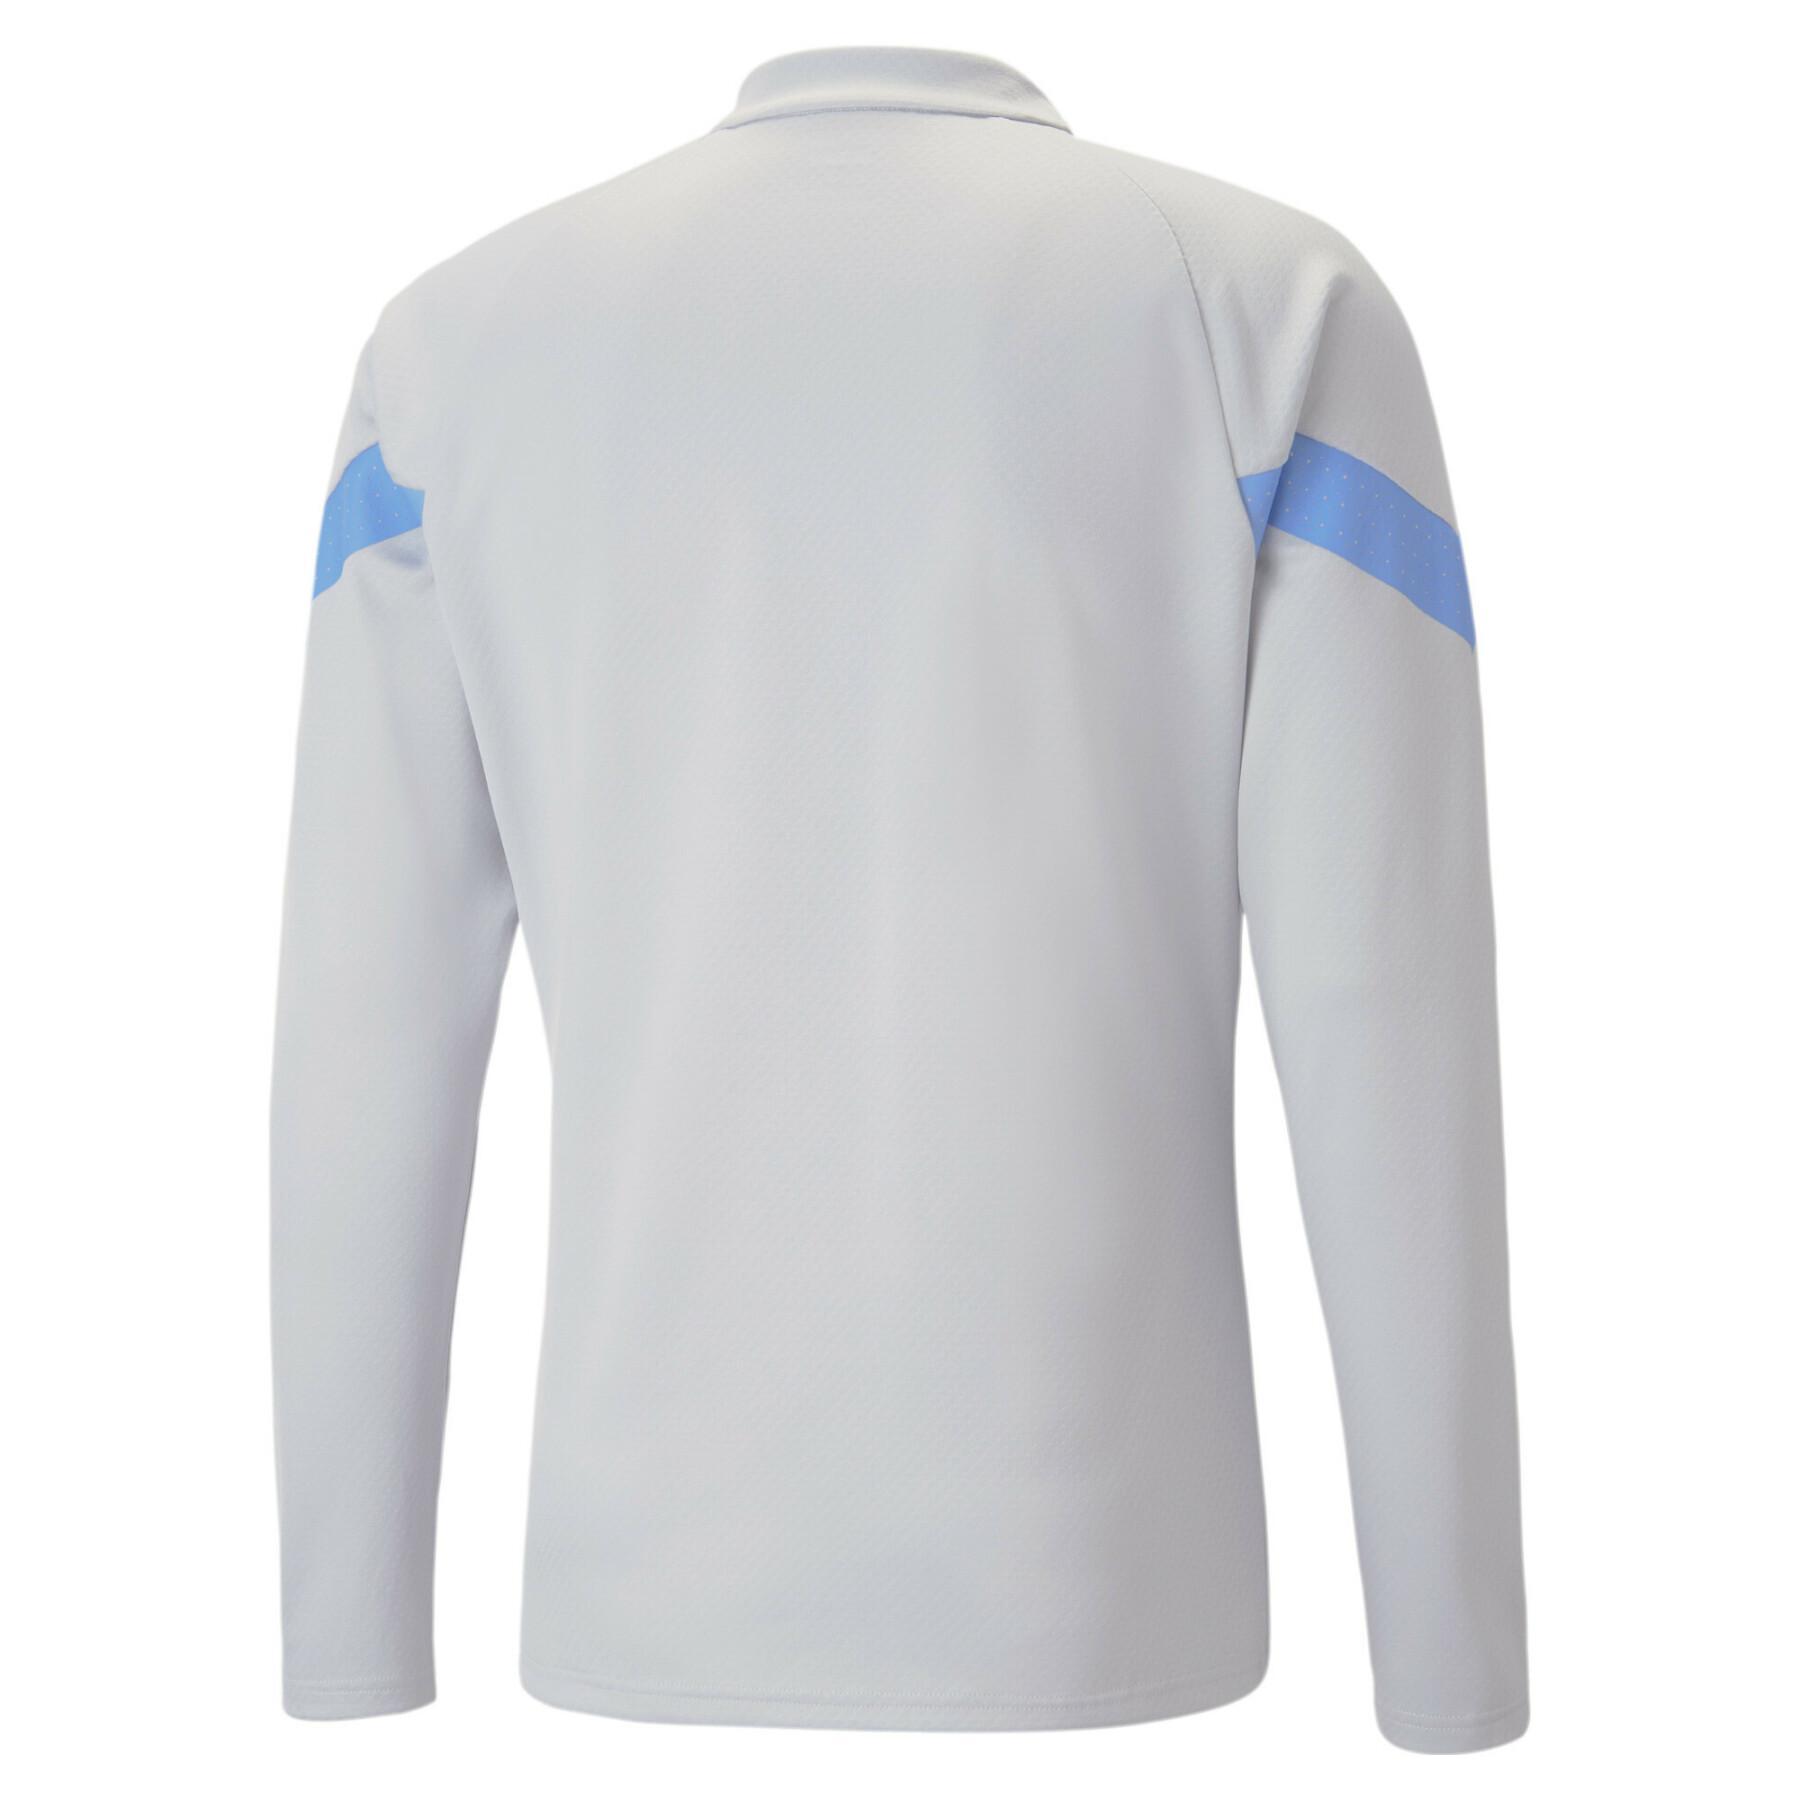 Training top Manchester City 2022/23